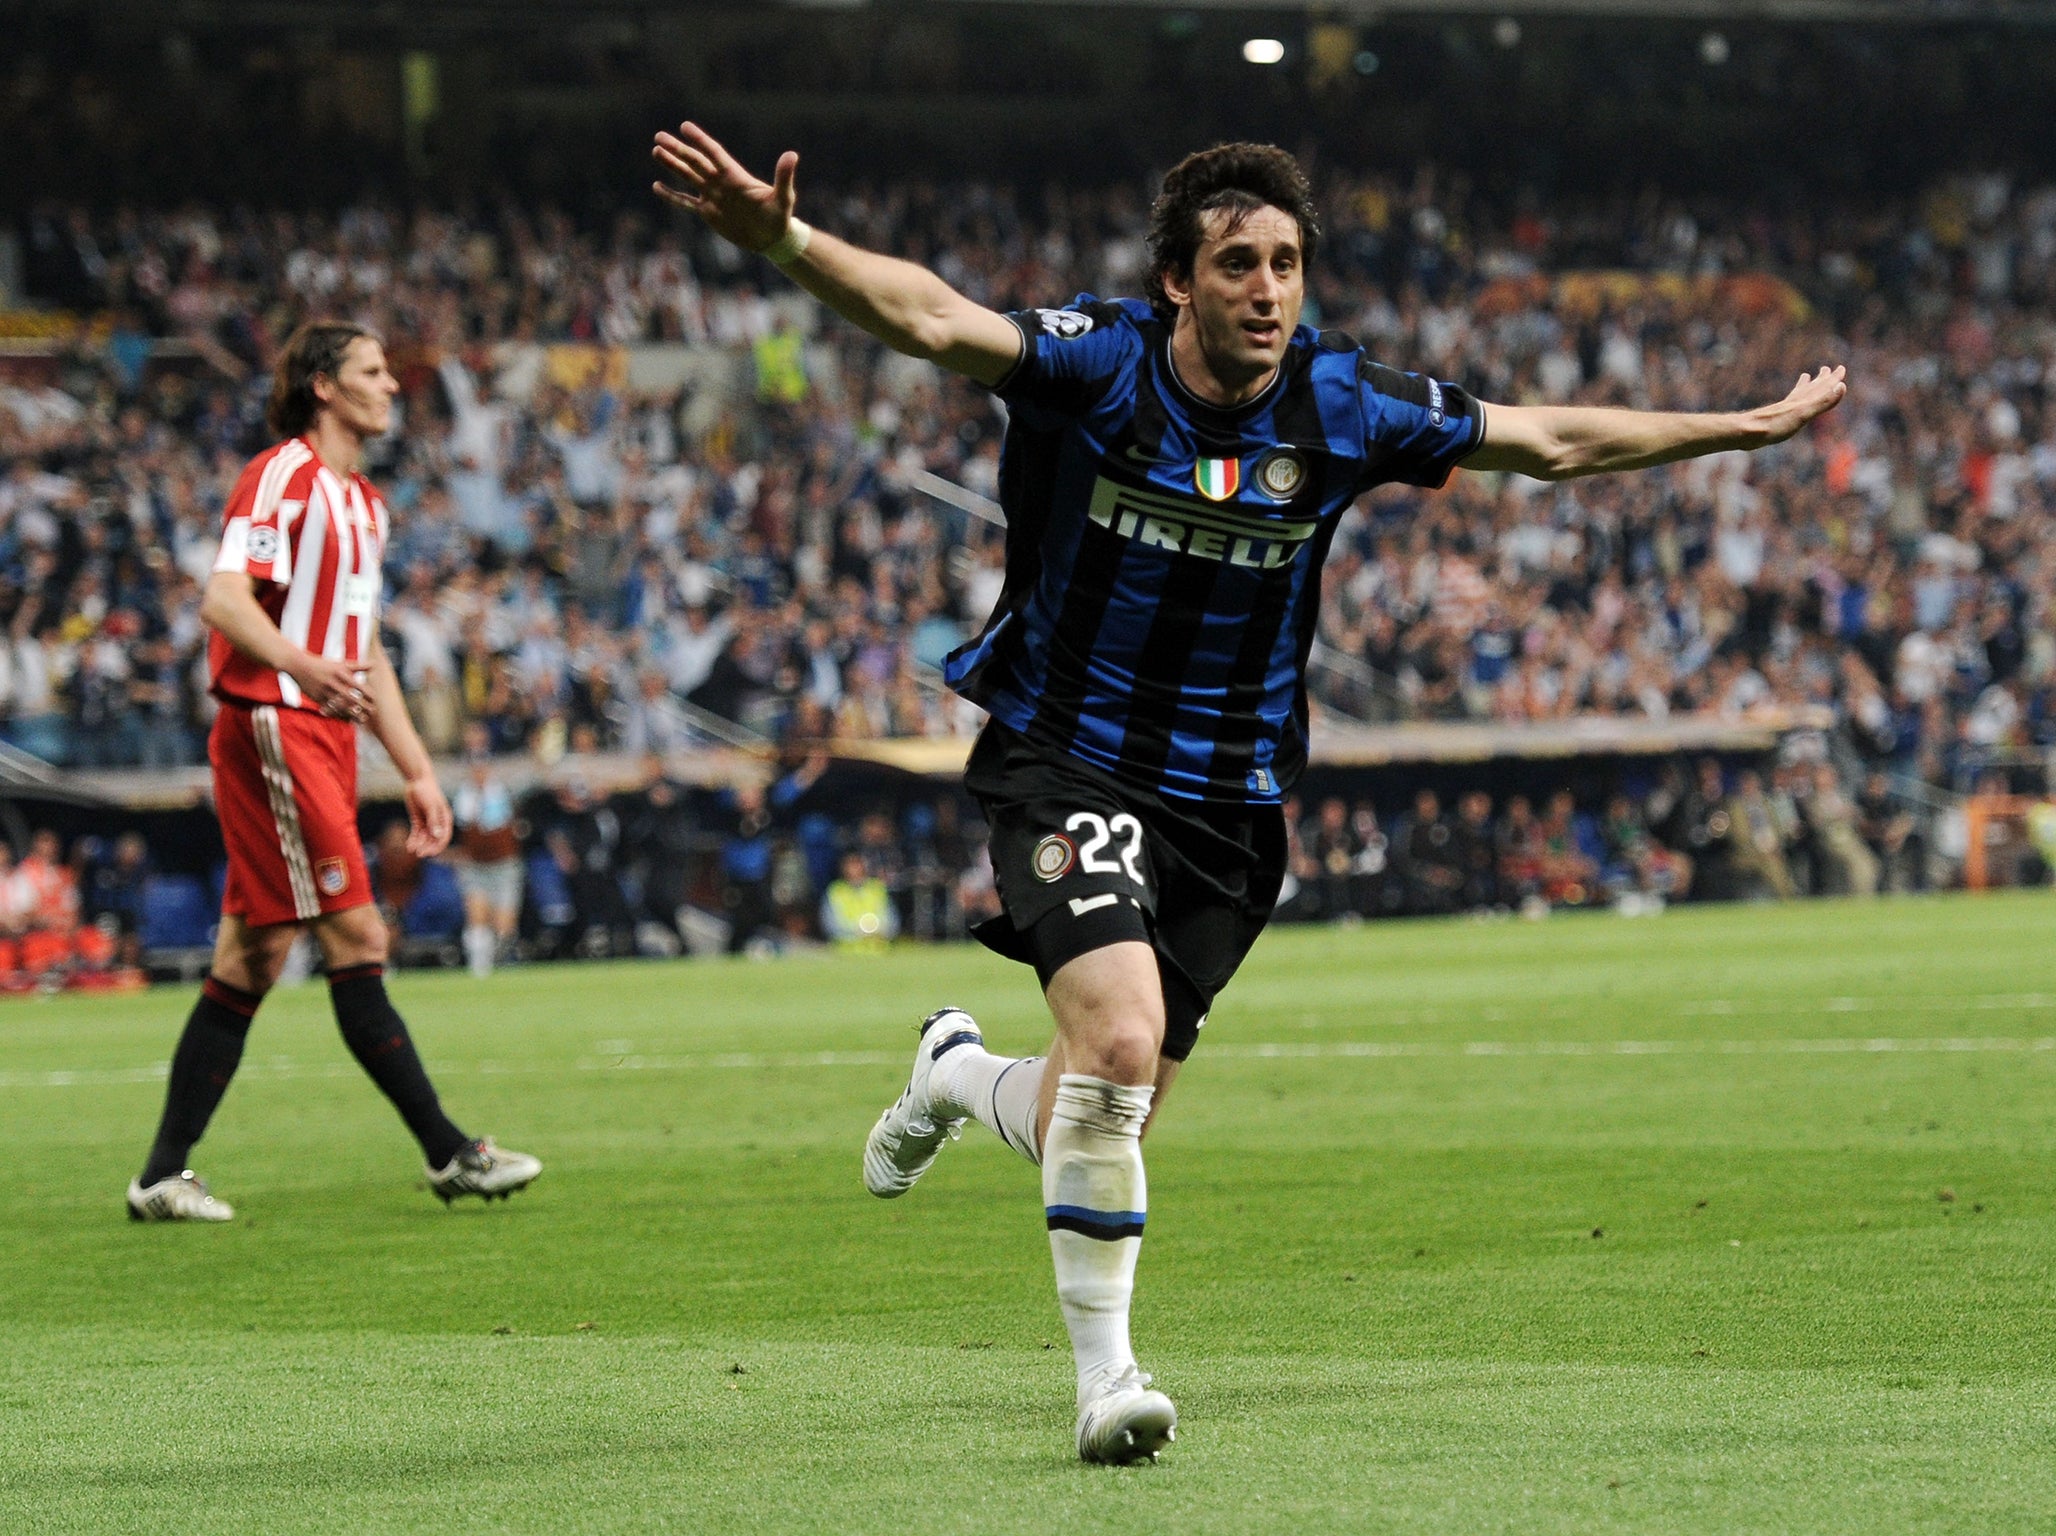 Diego Milito in the 2010 Champions League final